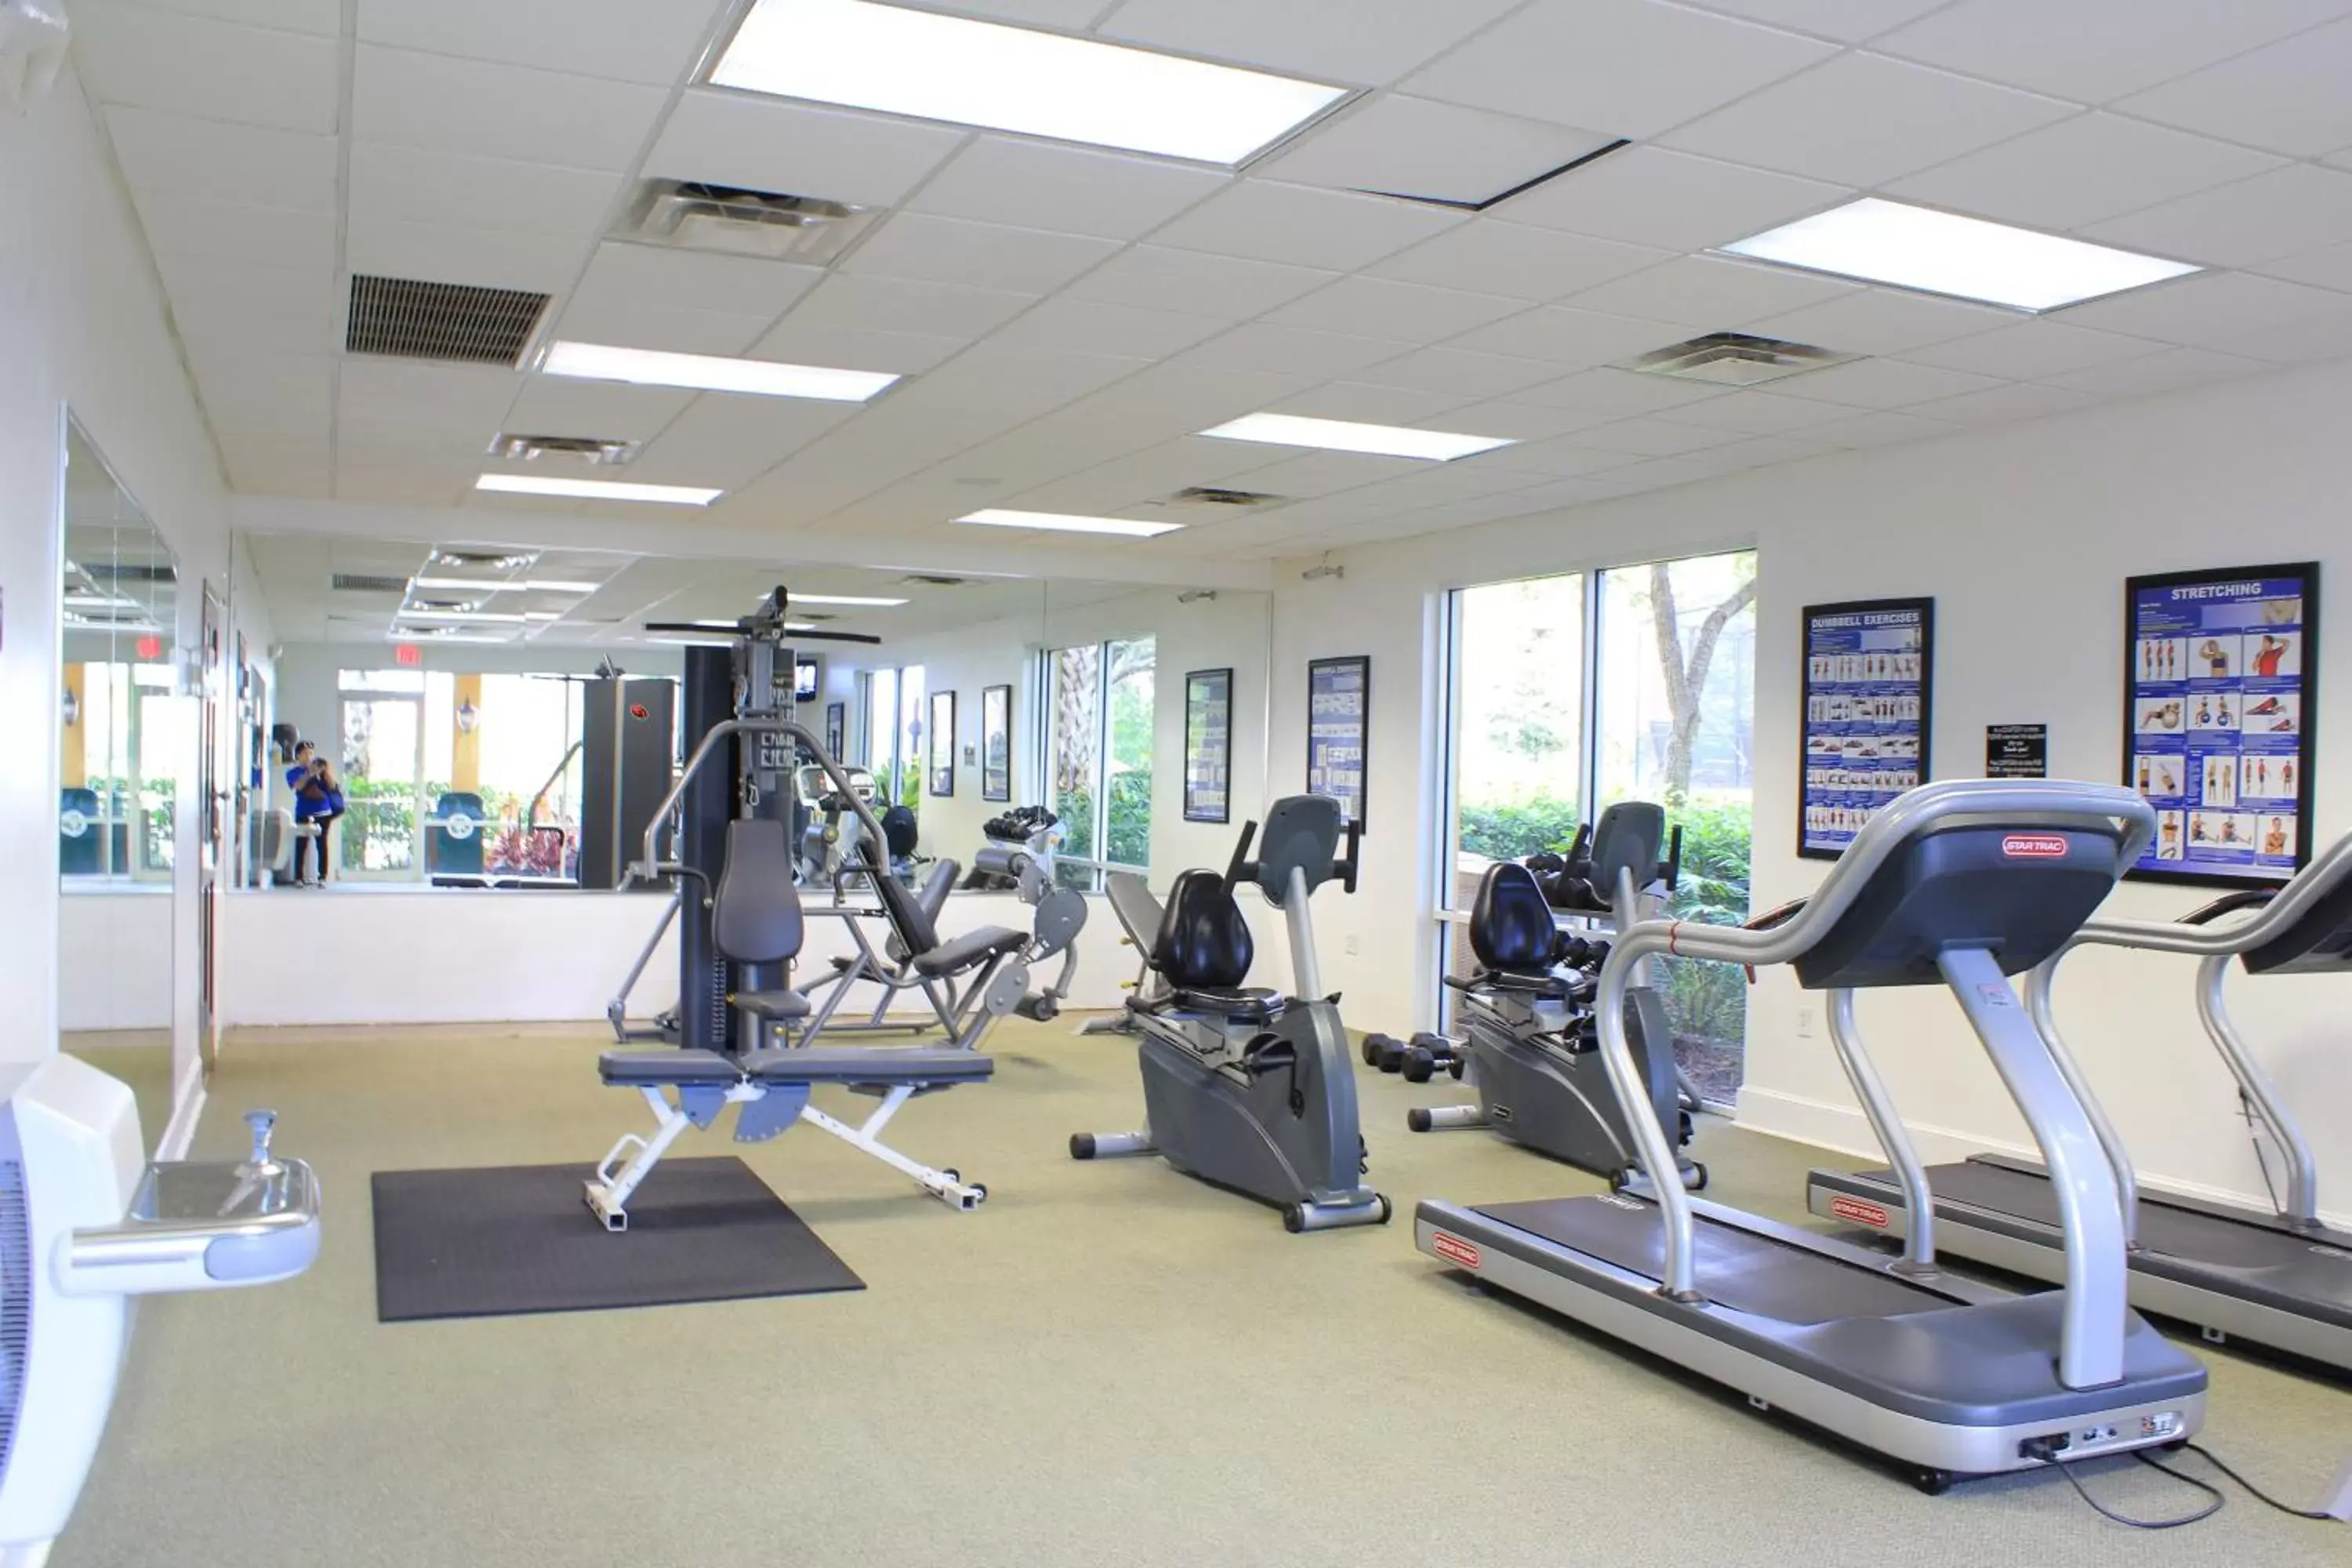 Fitness centre/facilities, Fitness Center/Facilities in Encantada Resort Vacation Townhomes by IDILIQ